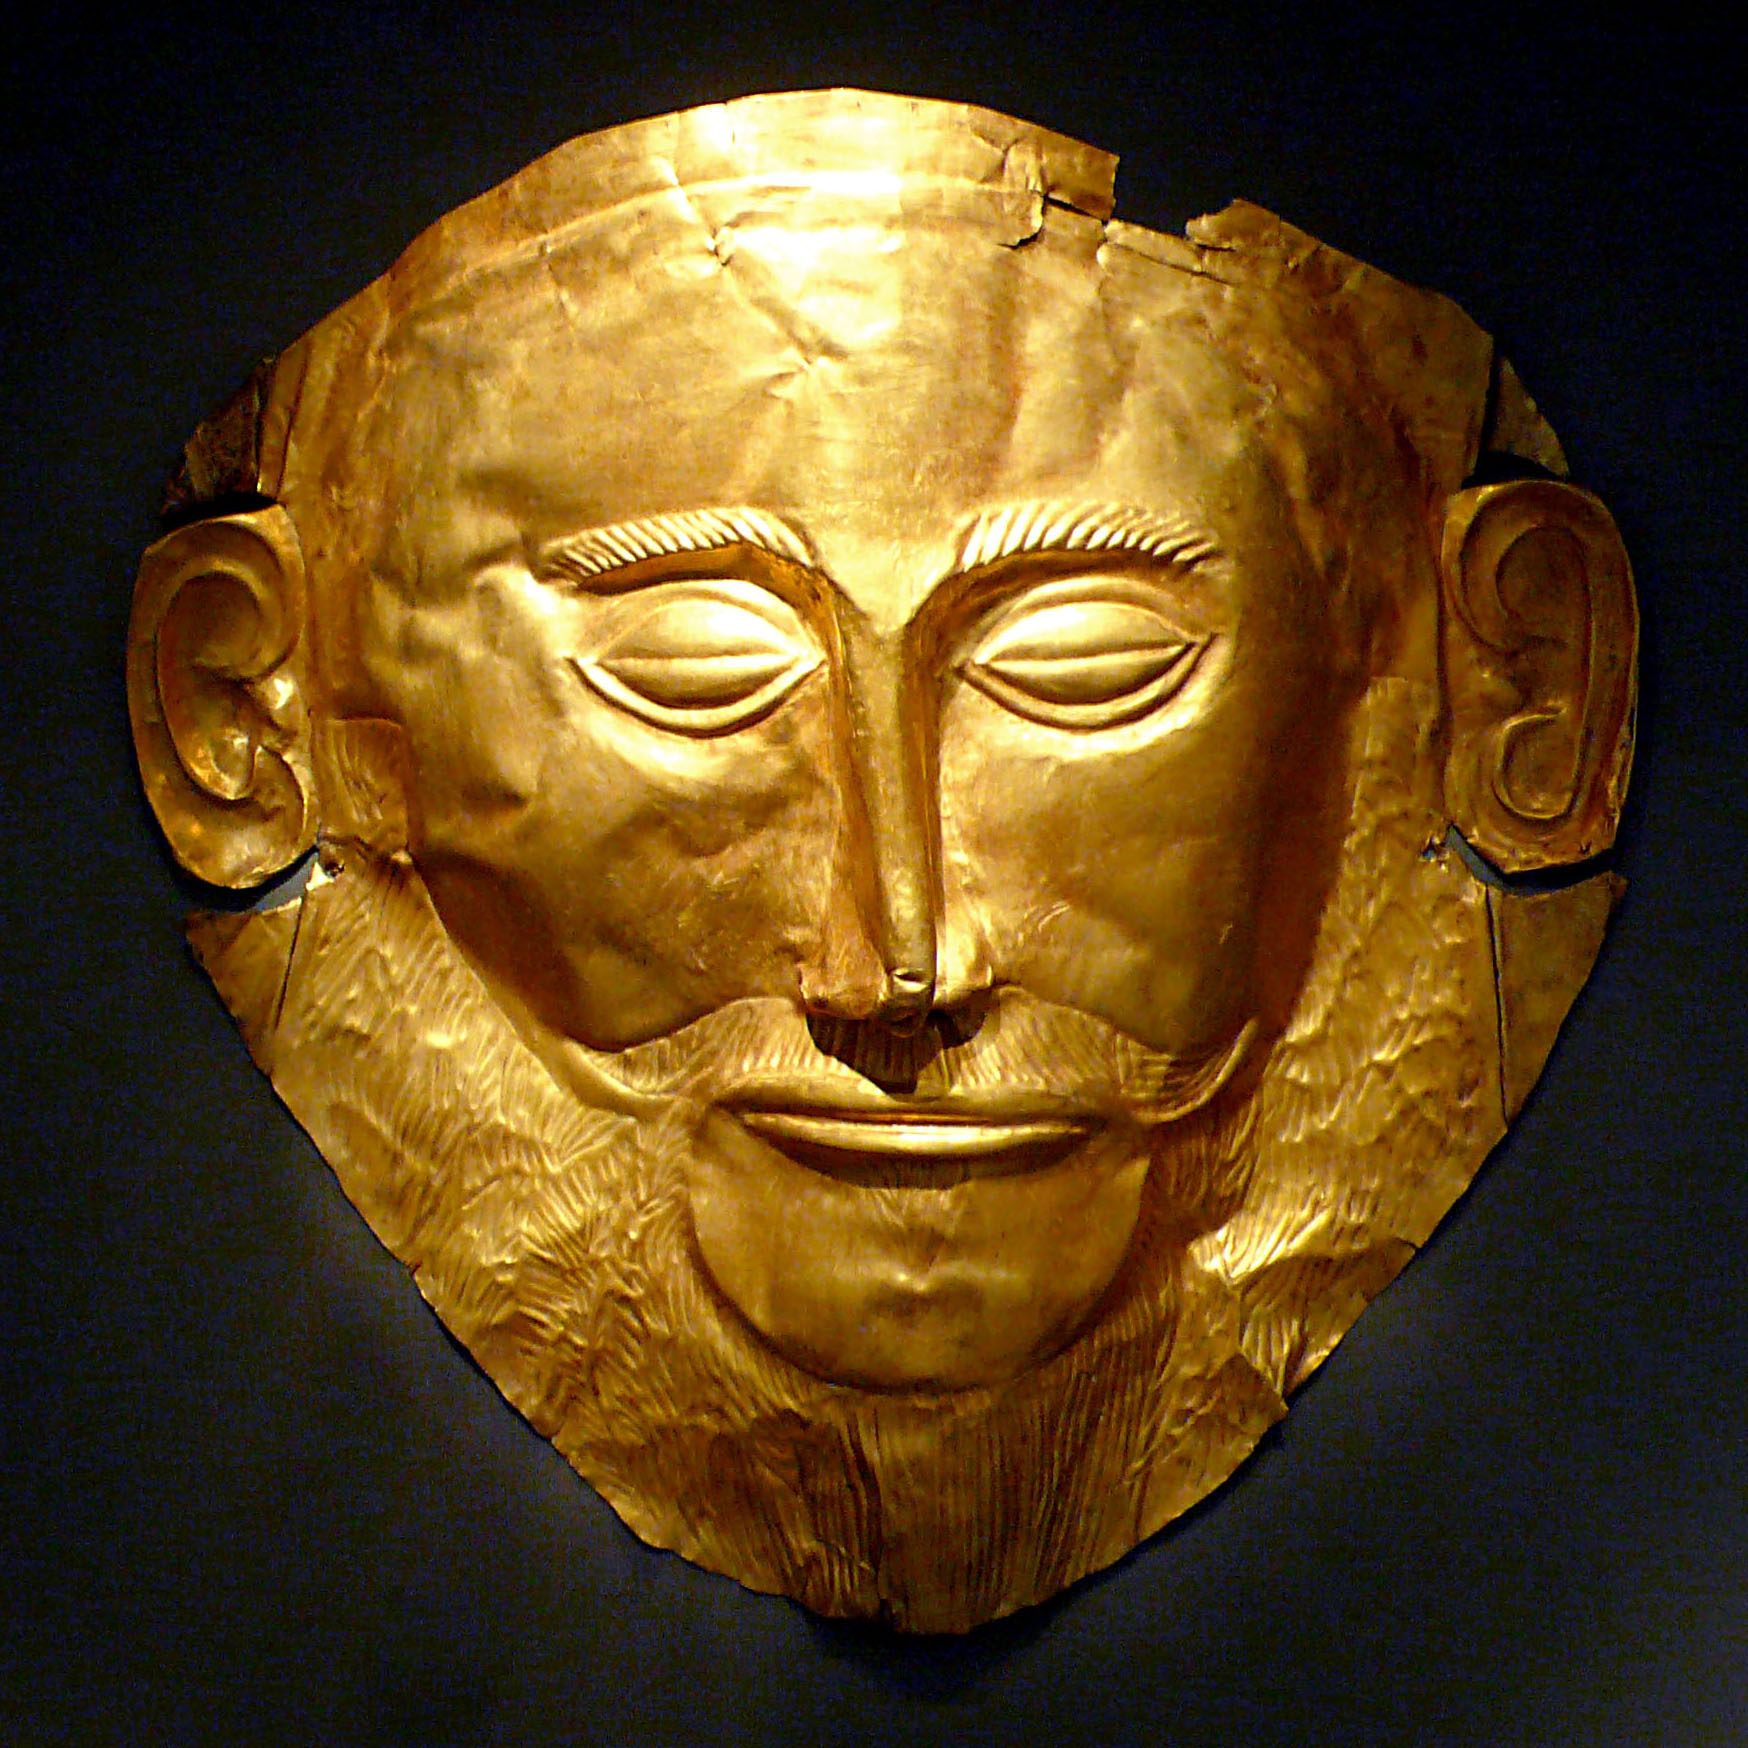 Mask of Agamemnon by Unknown Artist - 16th century BCE - 17 x 25 cm National Archaeological Museum, Athens